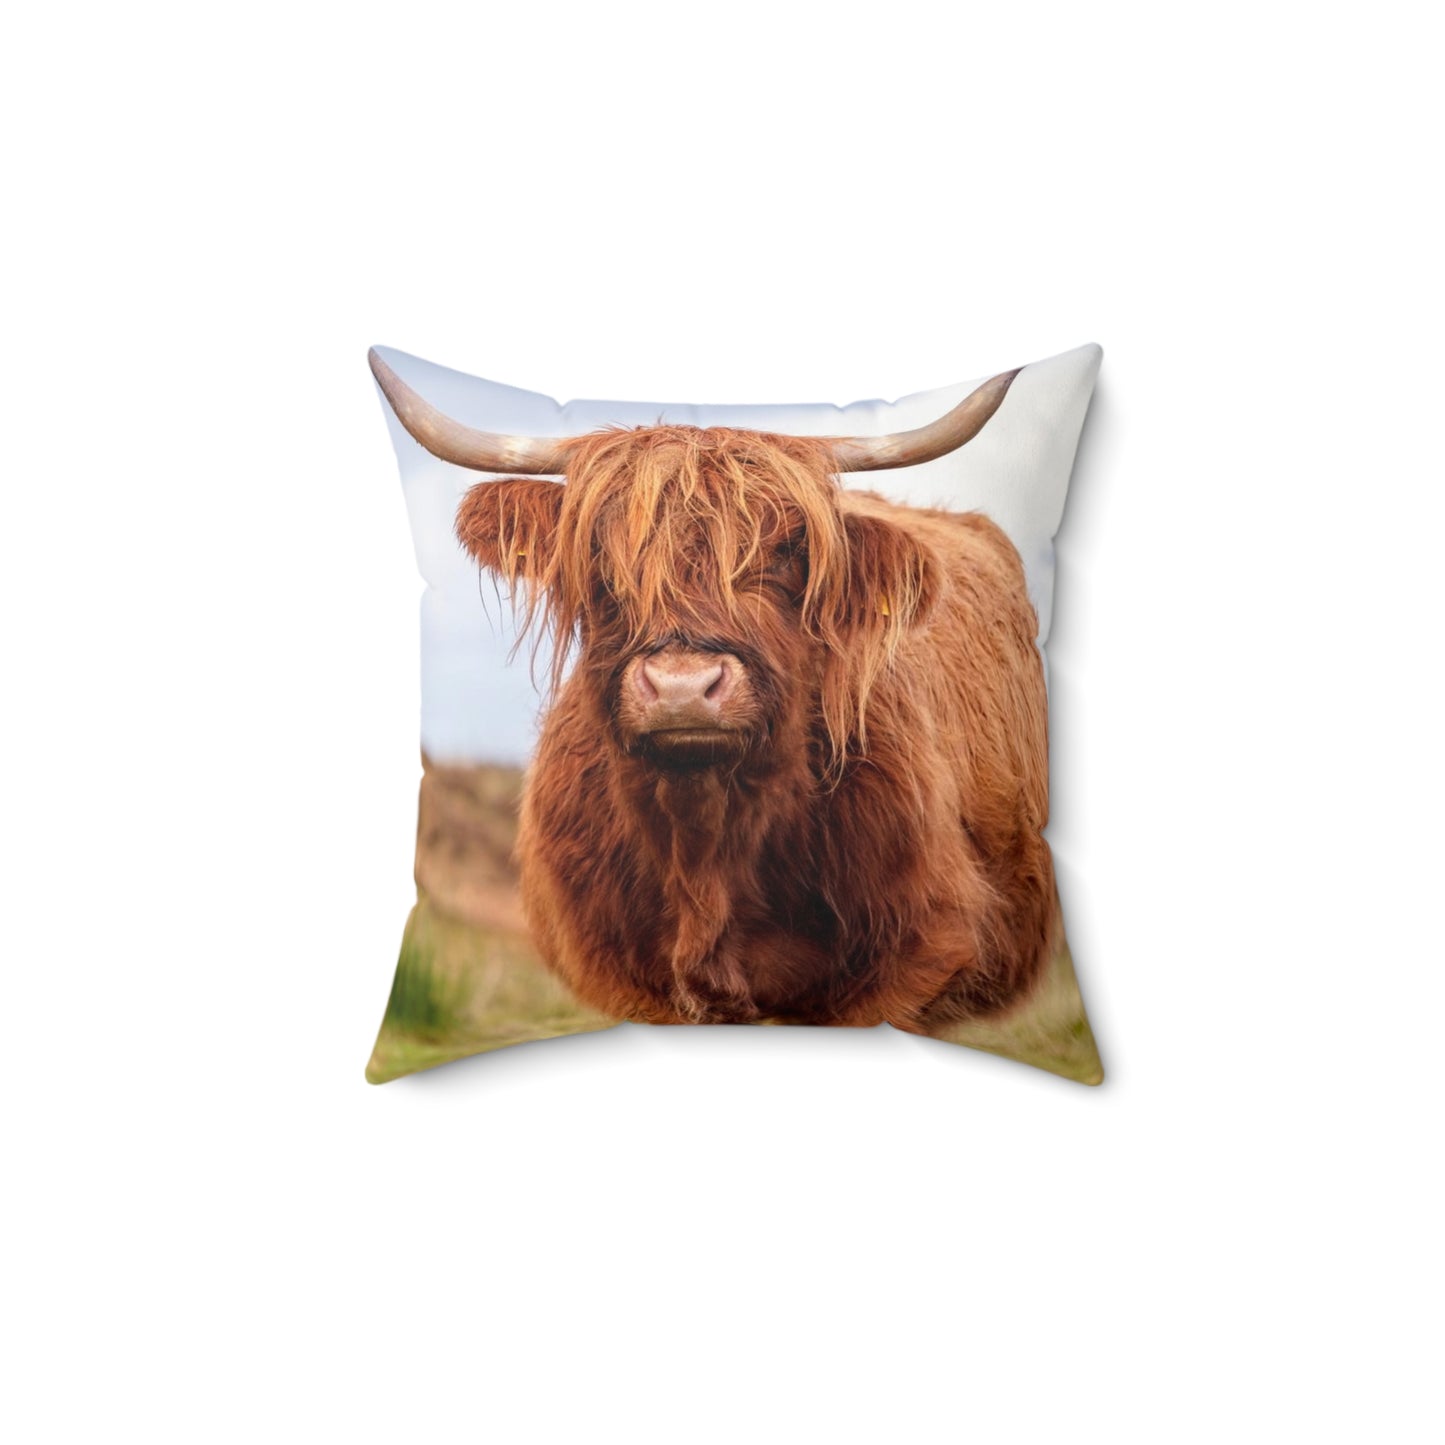 The Highland Cow  Square Pillow